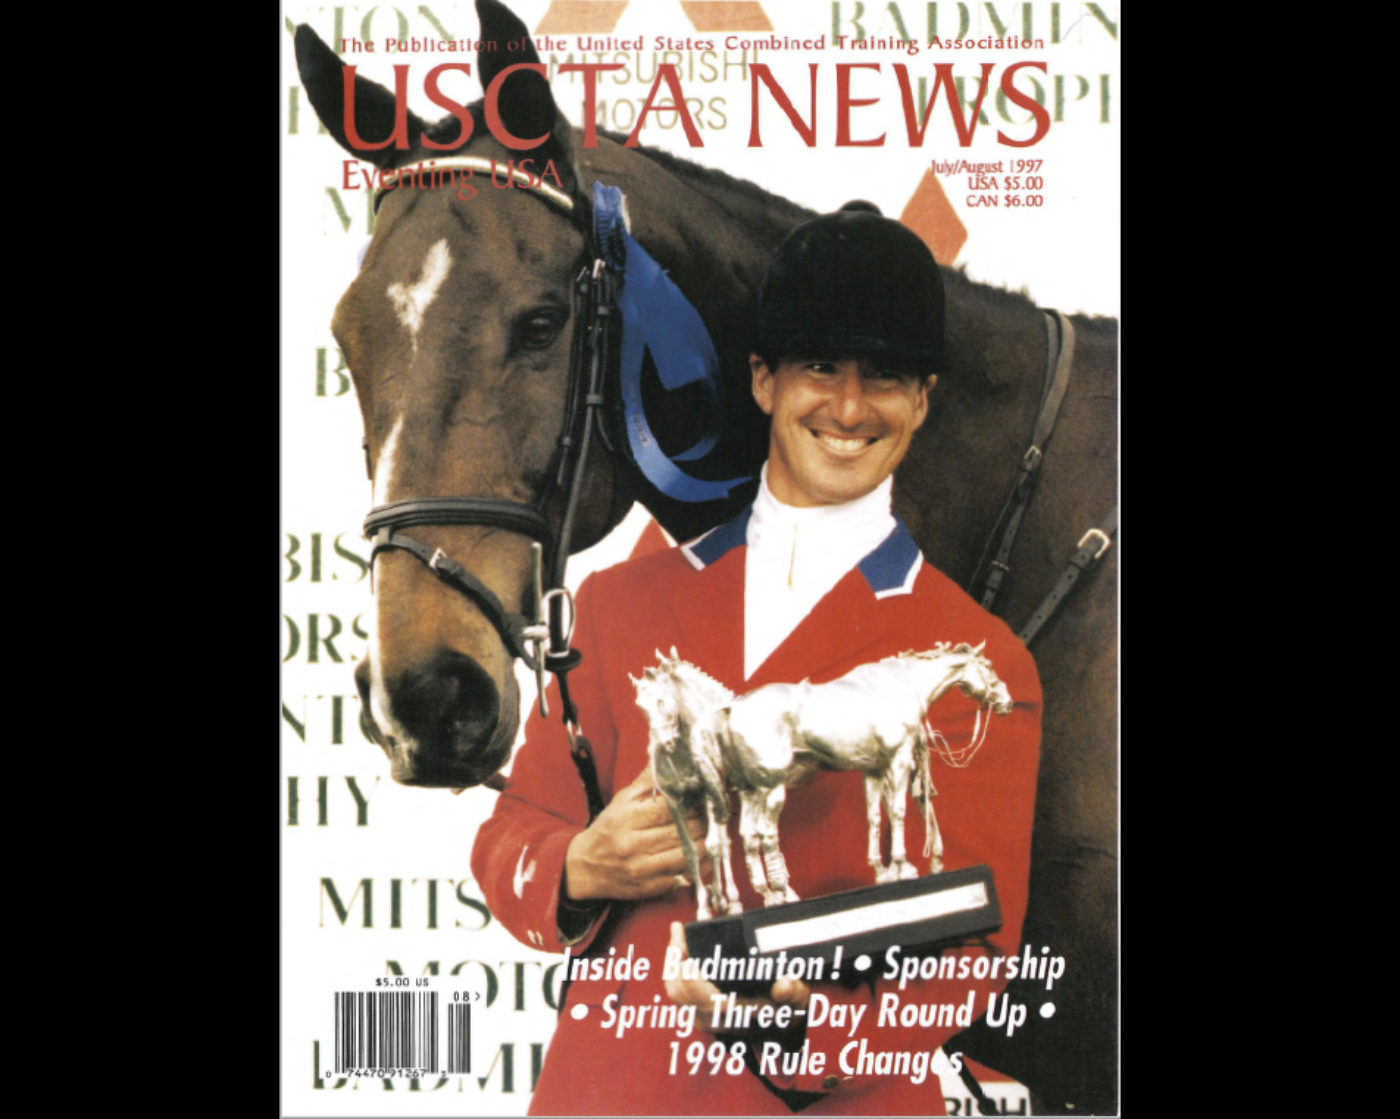 Throwback Thursday Presented by the USEA Foundation 20 Years Since an American Badminton Victory